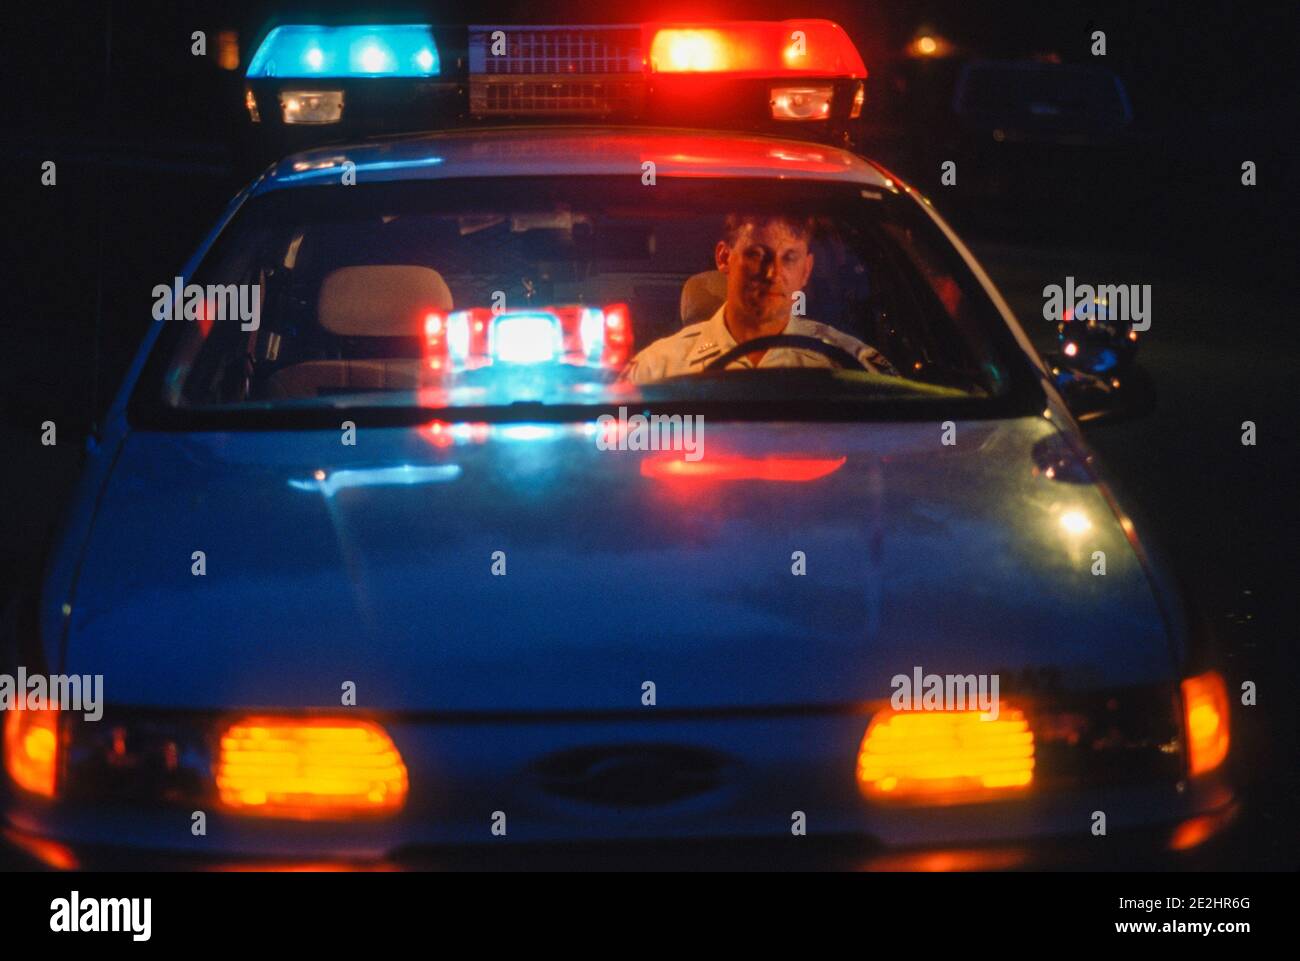 Police Officer Works the night shift in his car, 1996, in Florida, USA Stock Photo